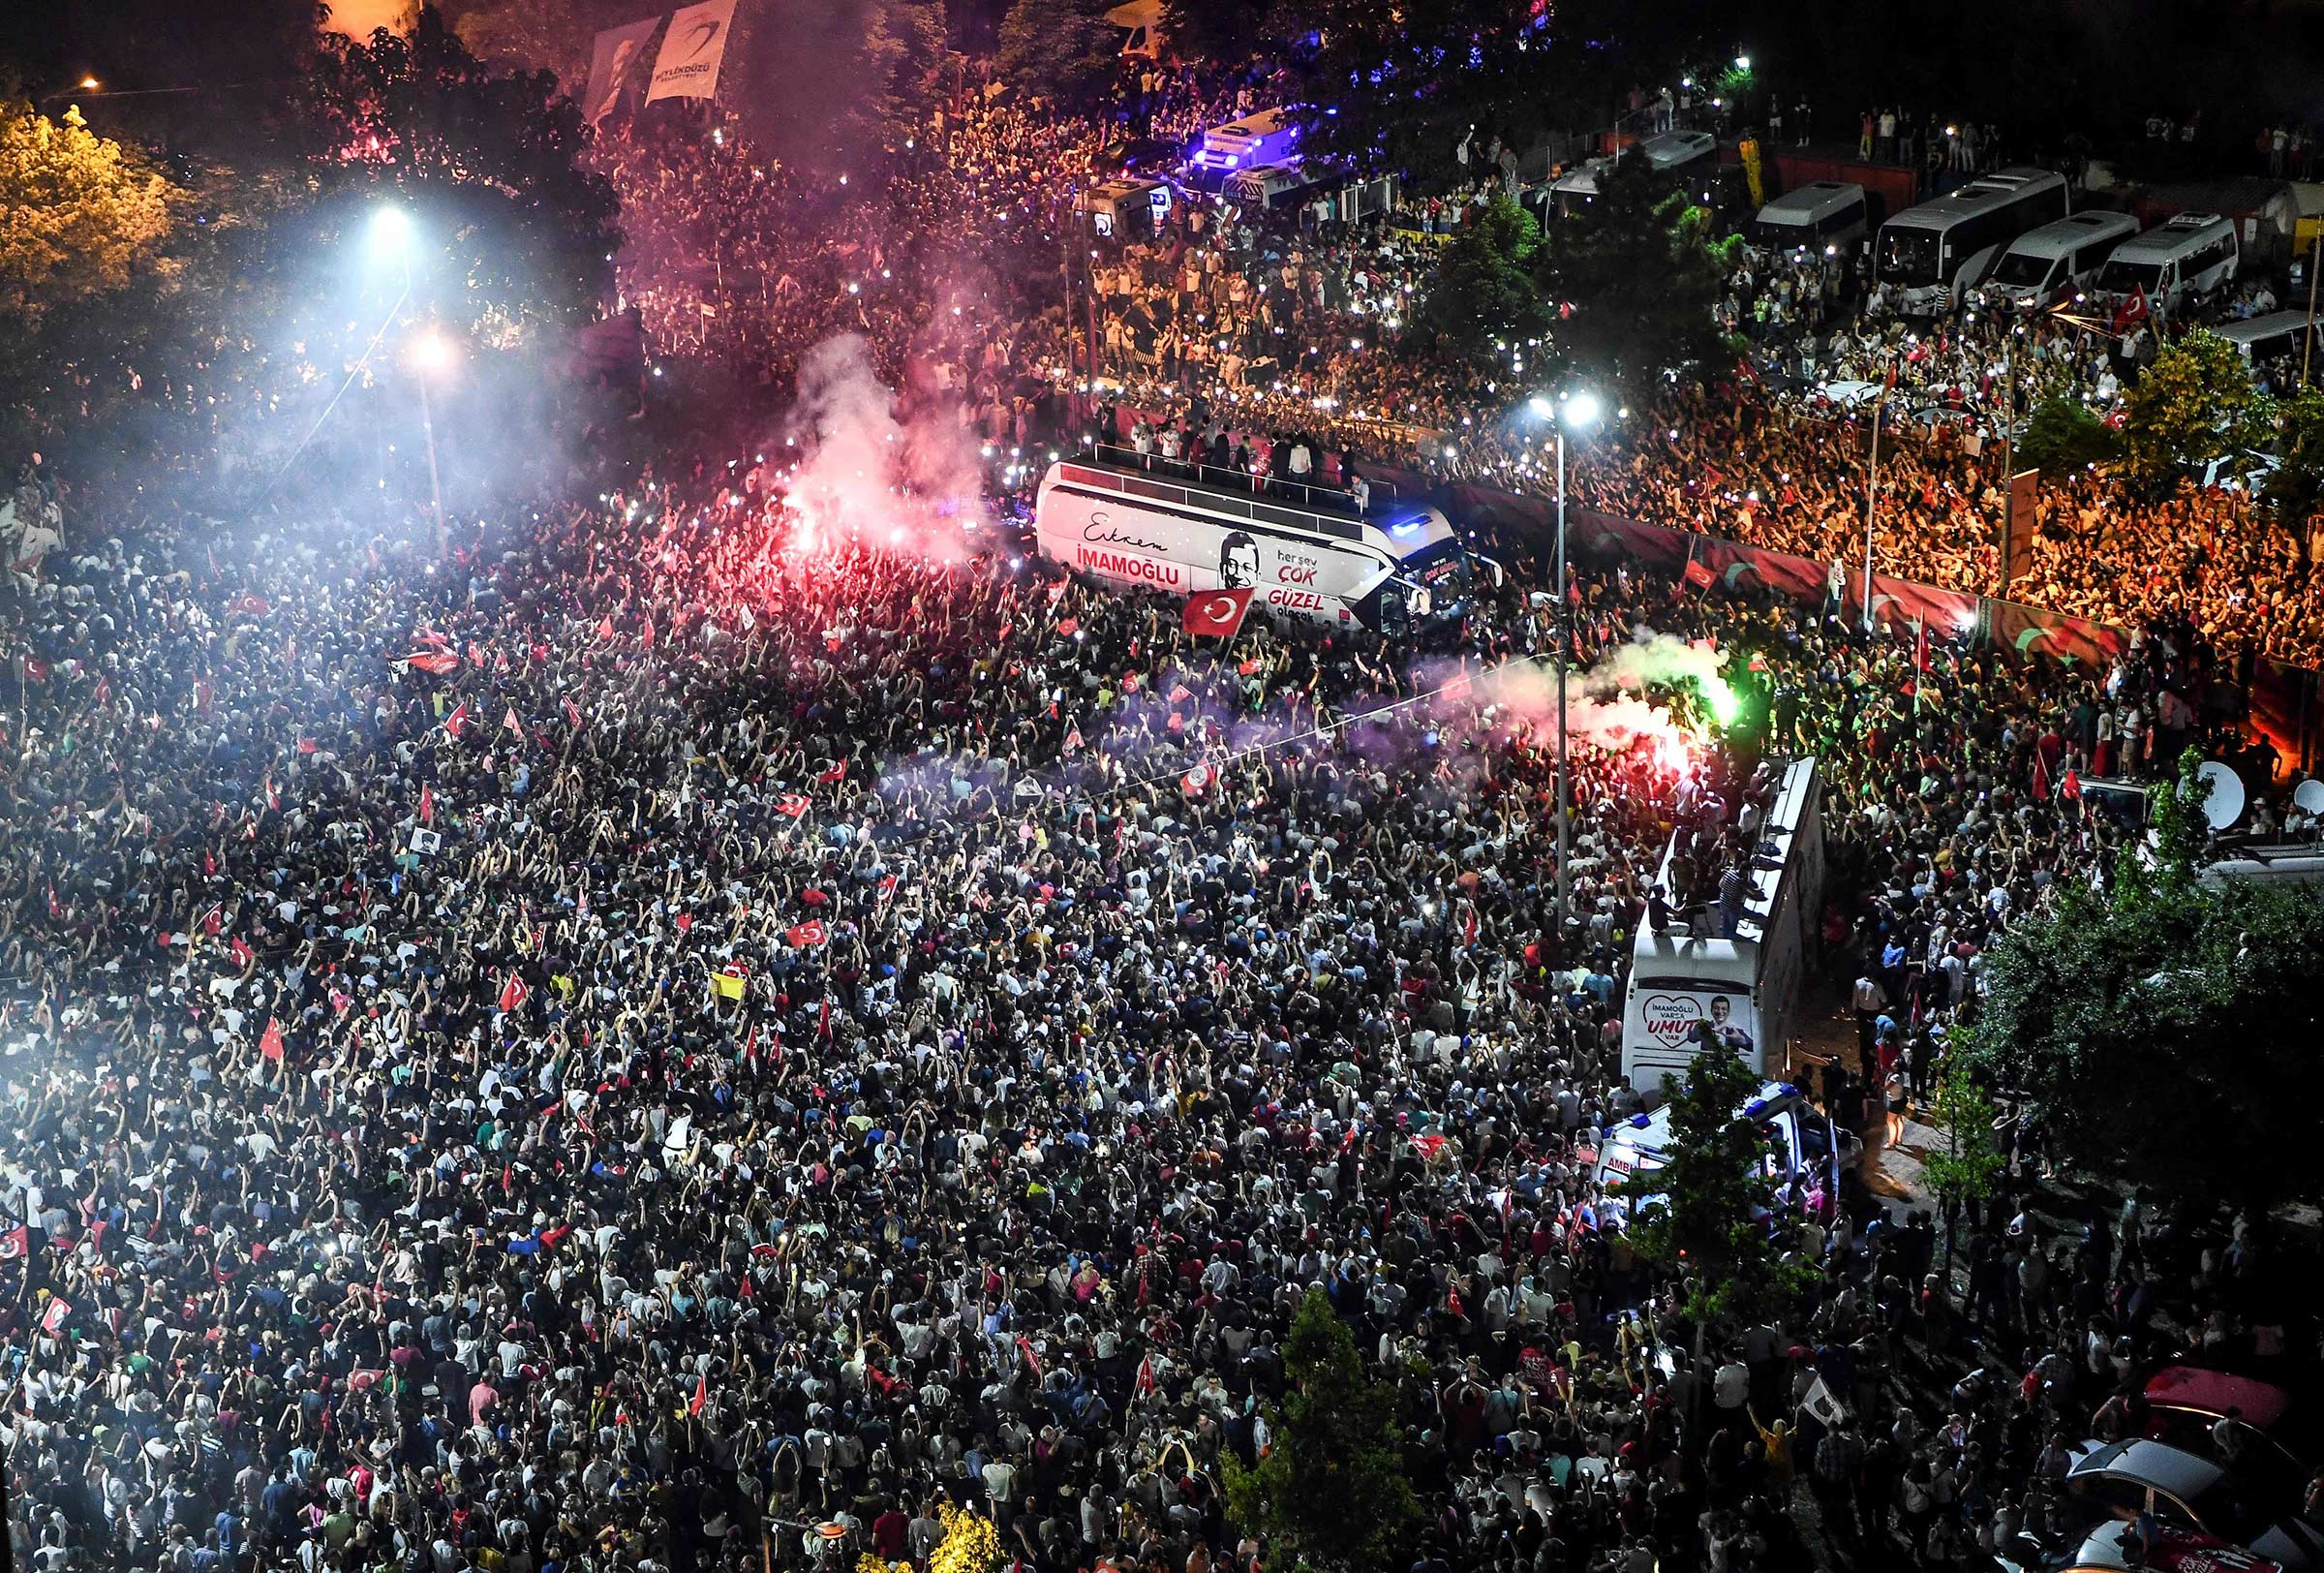 Istanbul citizens gather to celebrate after the Republican People's Party (CHP) candidate Ekrem Imamoglu won Istanbul's mayoral re-run elections on June 23. (STR/AFP/Getty Images)